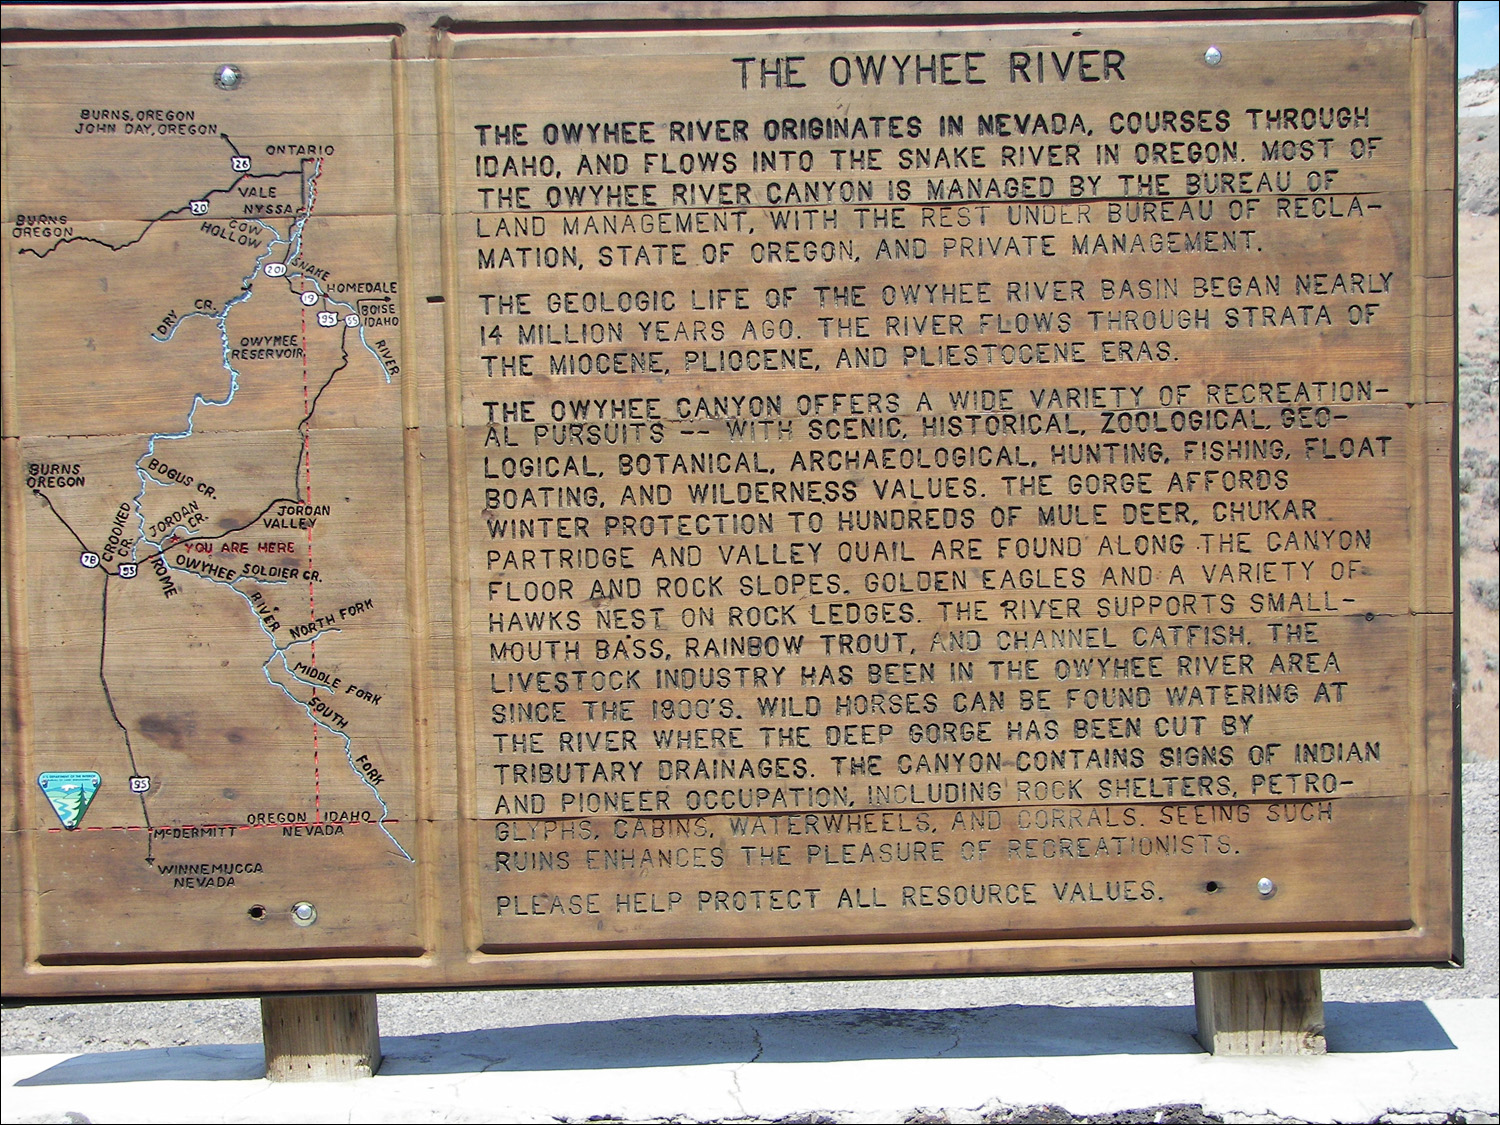 Information sign about the Owyhee river on Highway 95